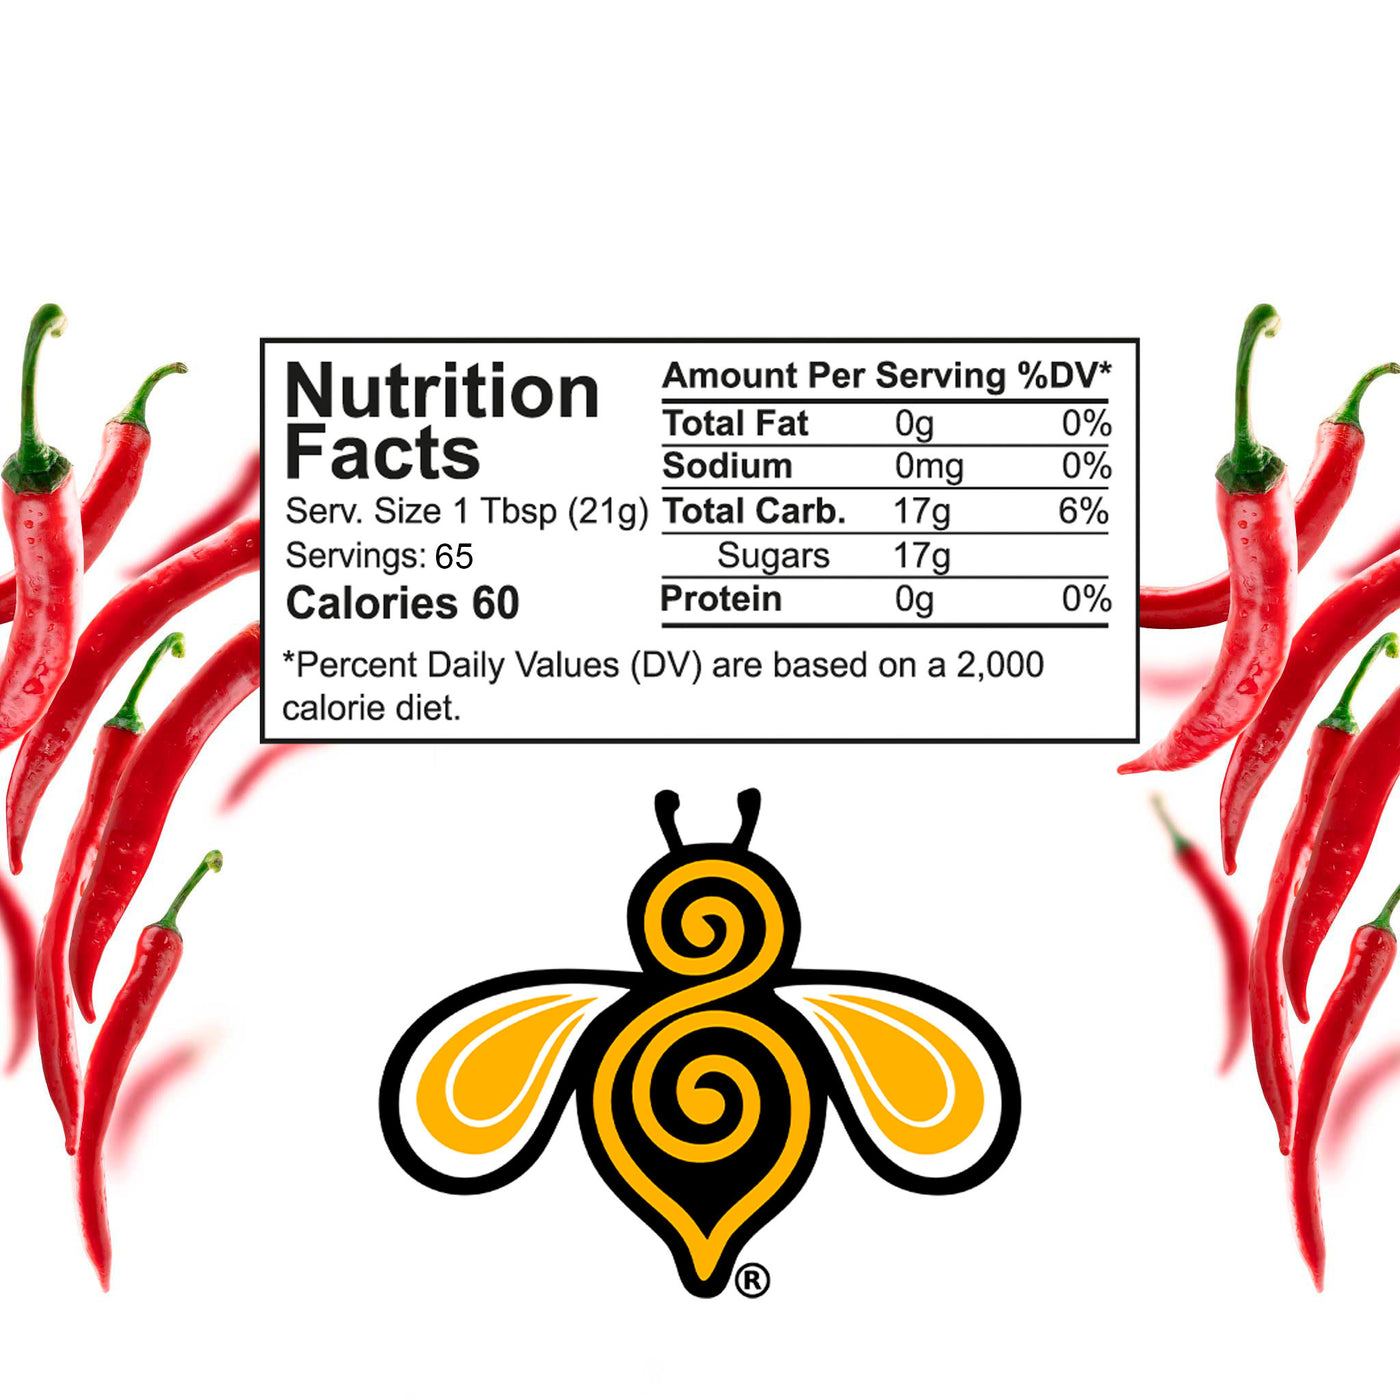 A close-up photo of a nutrition label. The label includes information about the serving size, calories, fat, sodium, carbohydrates, protein, and sugars.